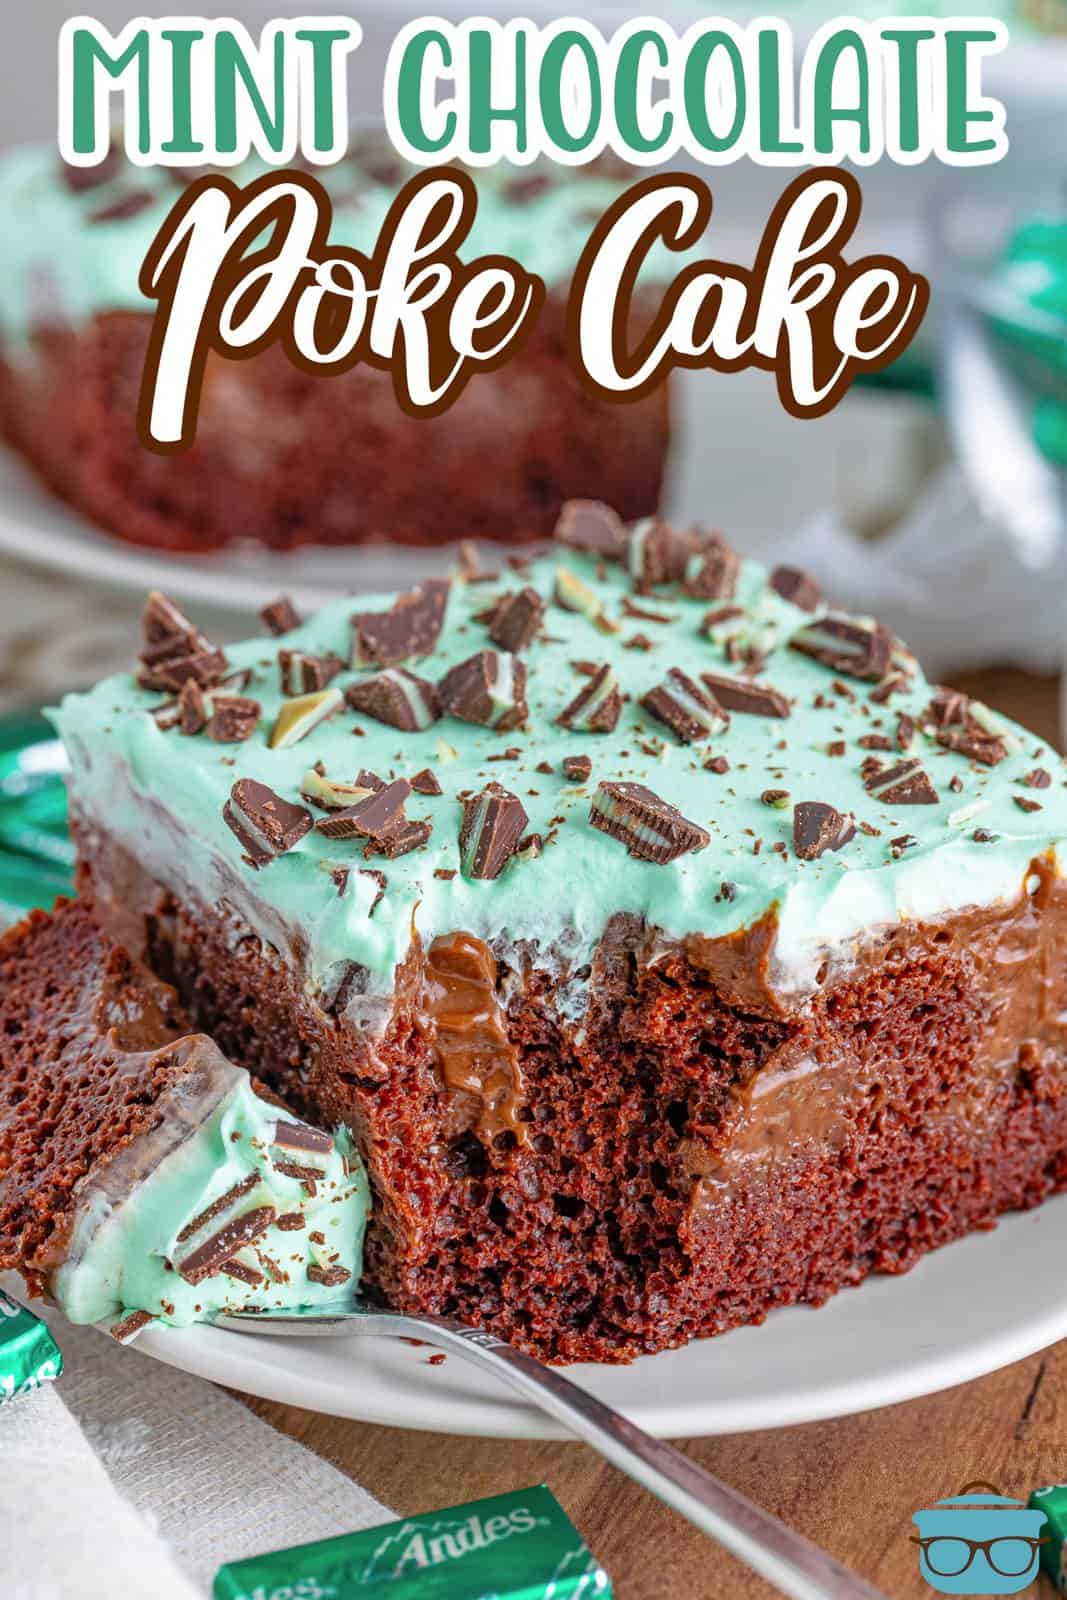 A slice of Mint Chocolate Poke Cake with a fork on a plate.